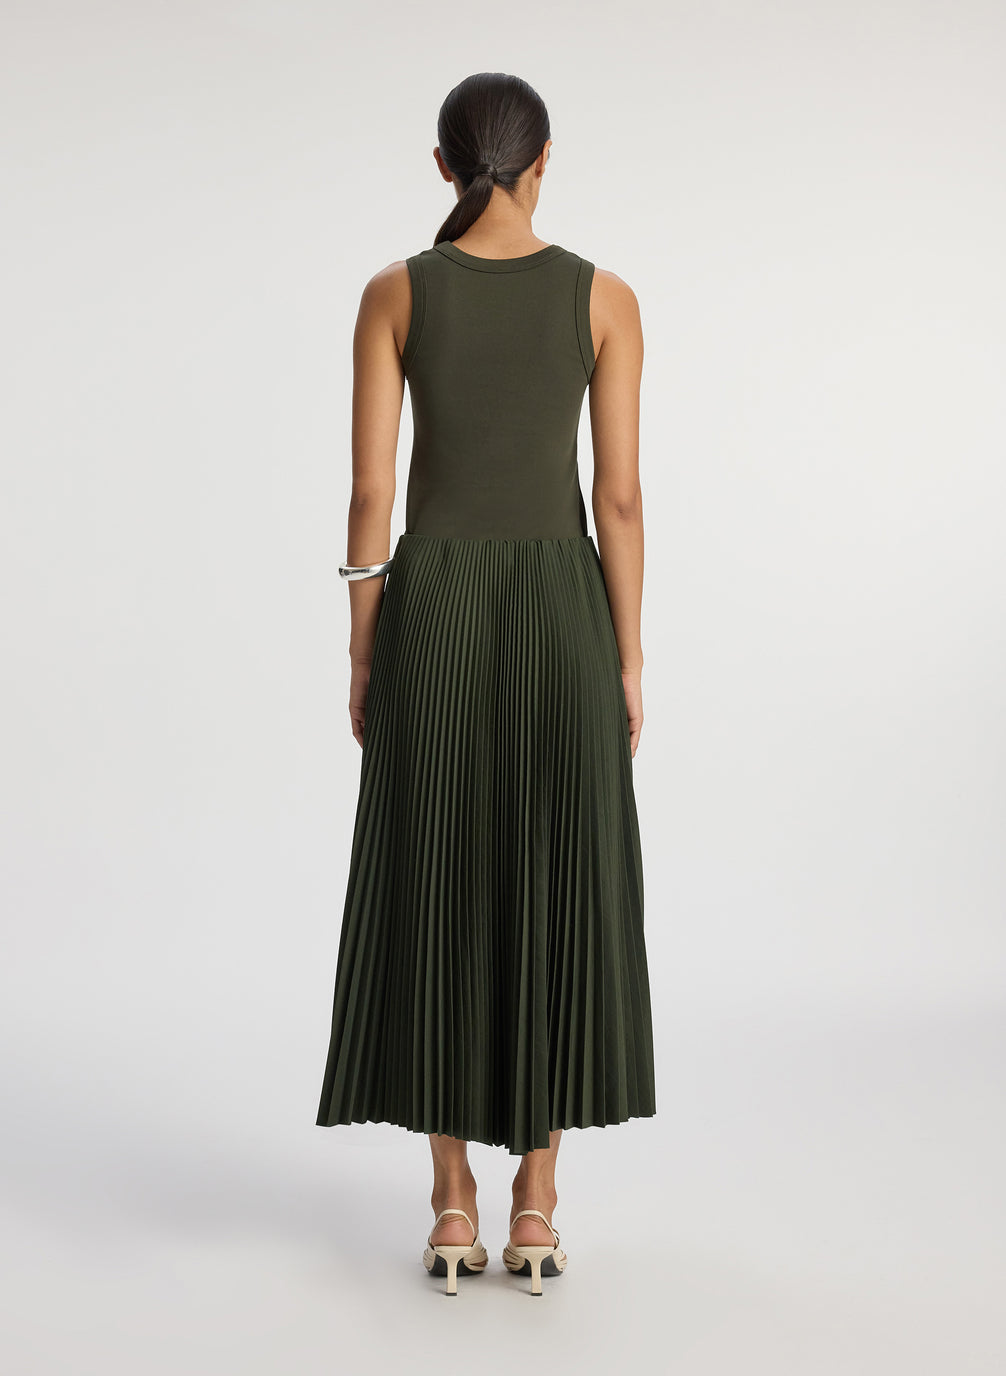 back  view of woman wearing olive green tank with olive green pleated midi skirt